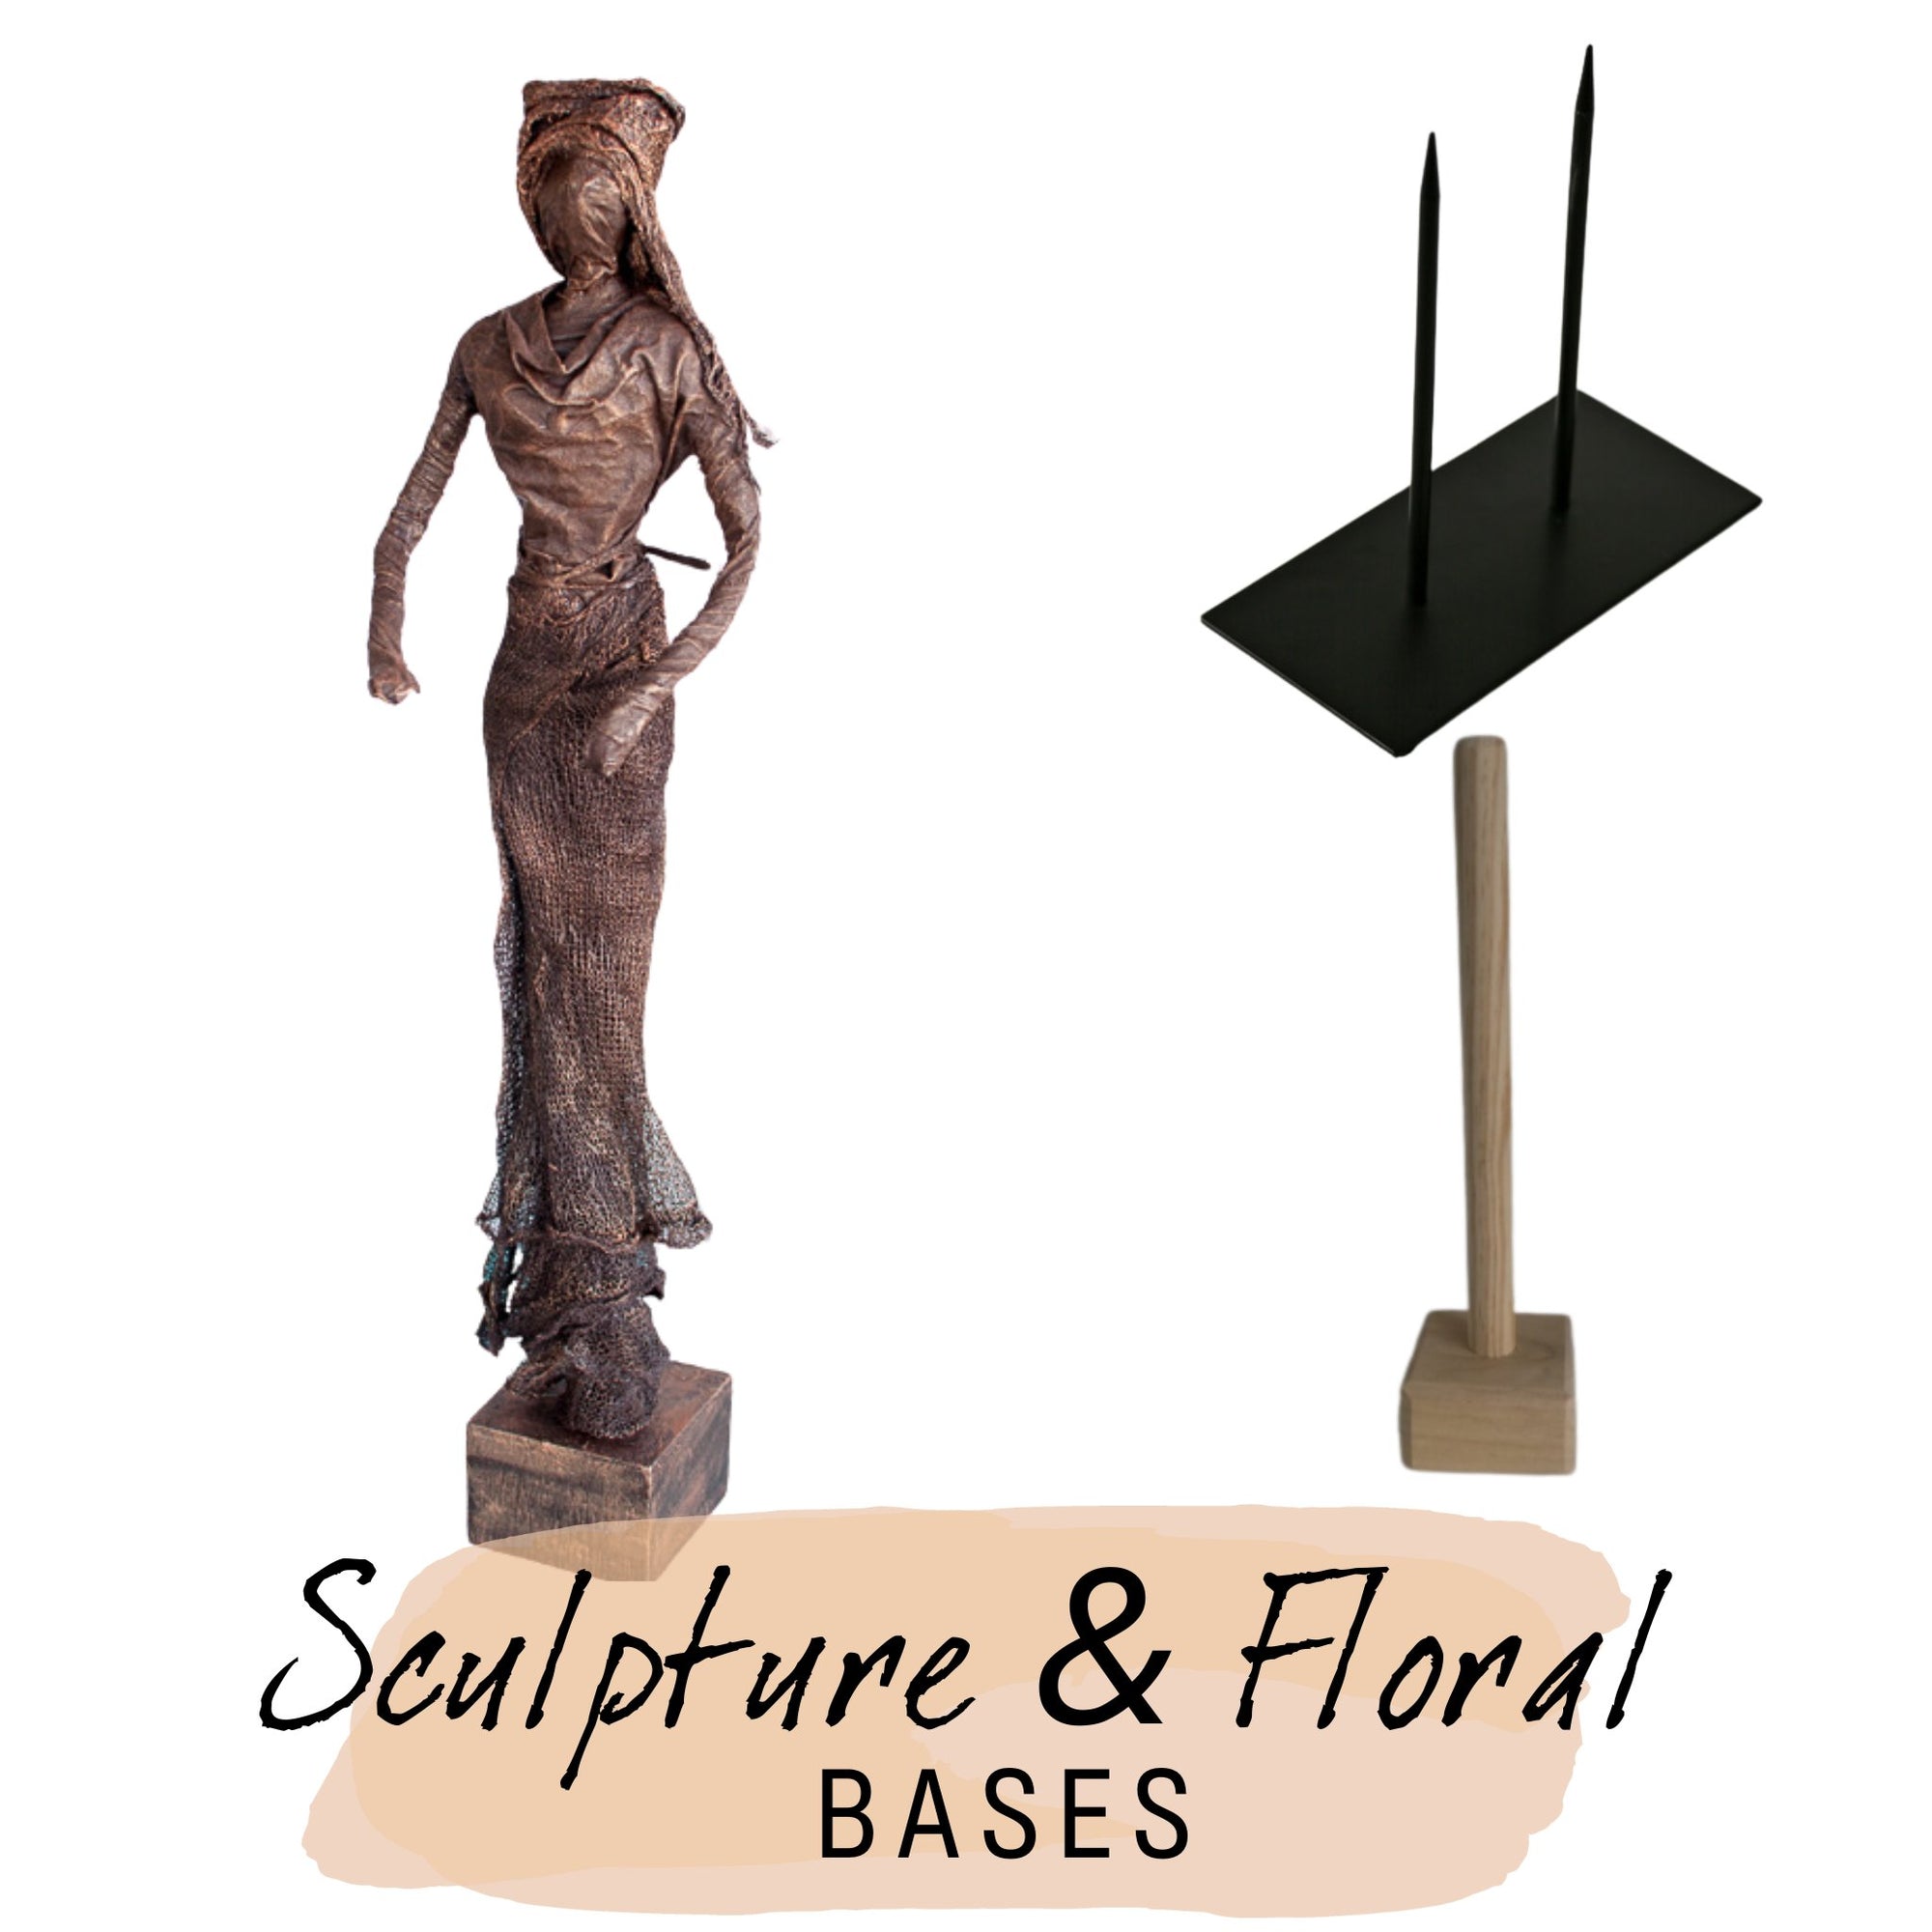 Powertexcreations, your online store for sculpting and Mixed Media, has beautiful black metal bases in inventory for sculptors and floral designers. 